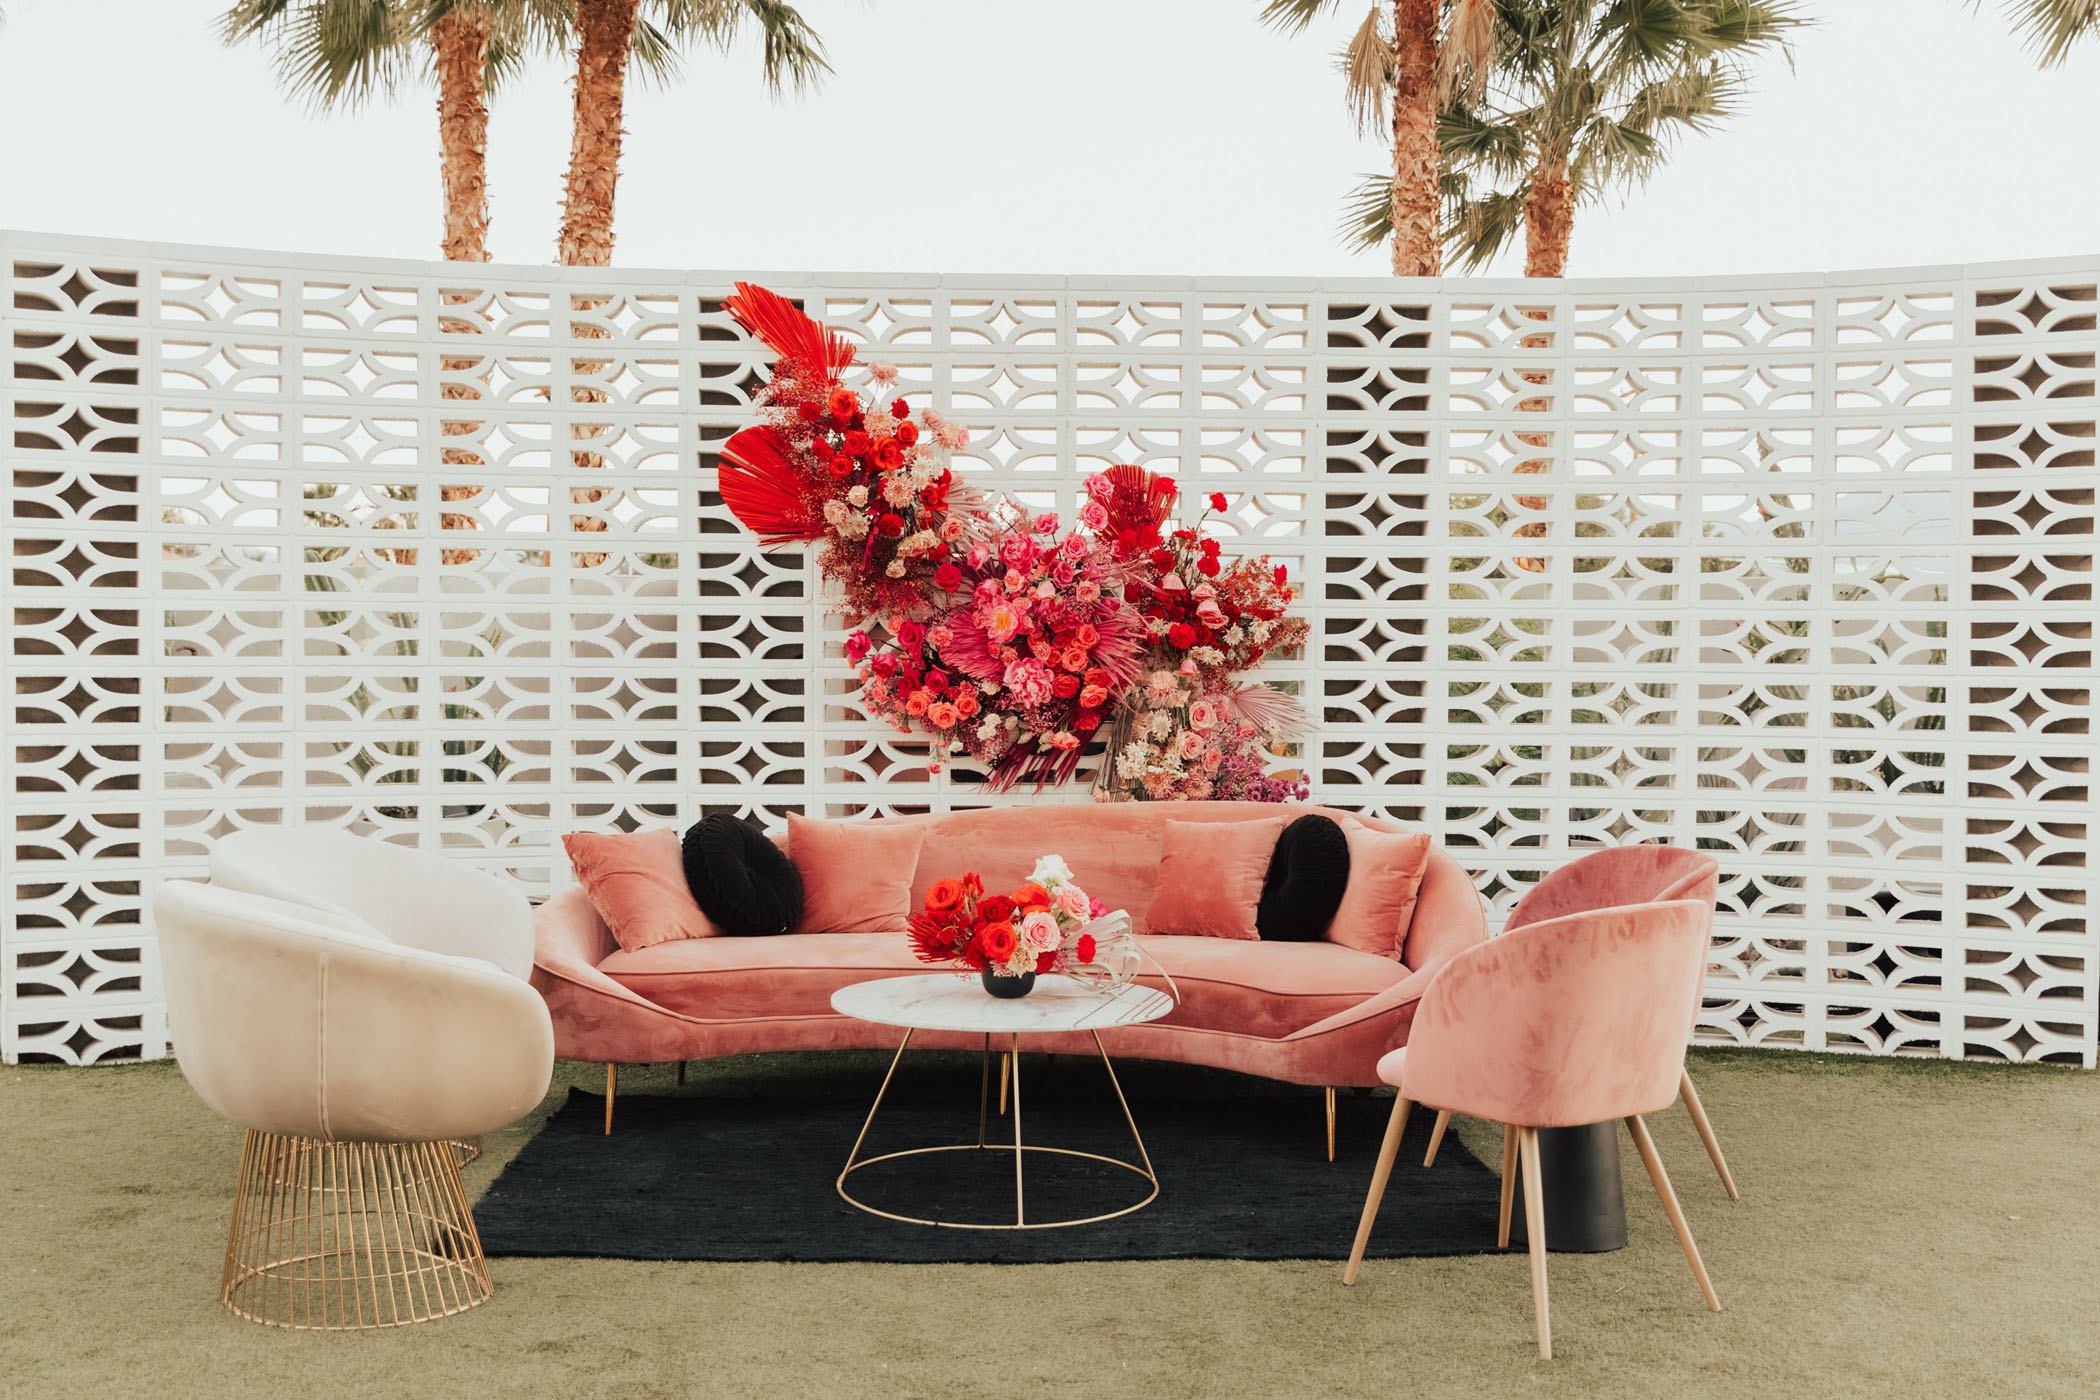 Glam Pink and Red Palm Springs Wedding Reception